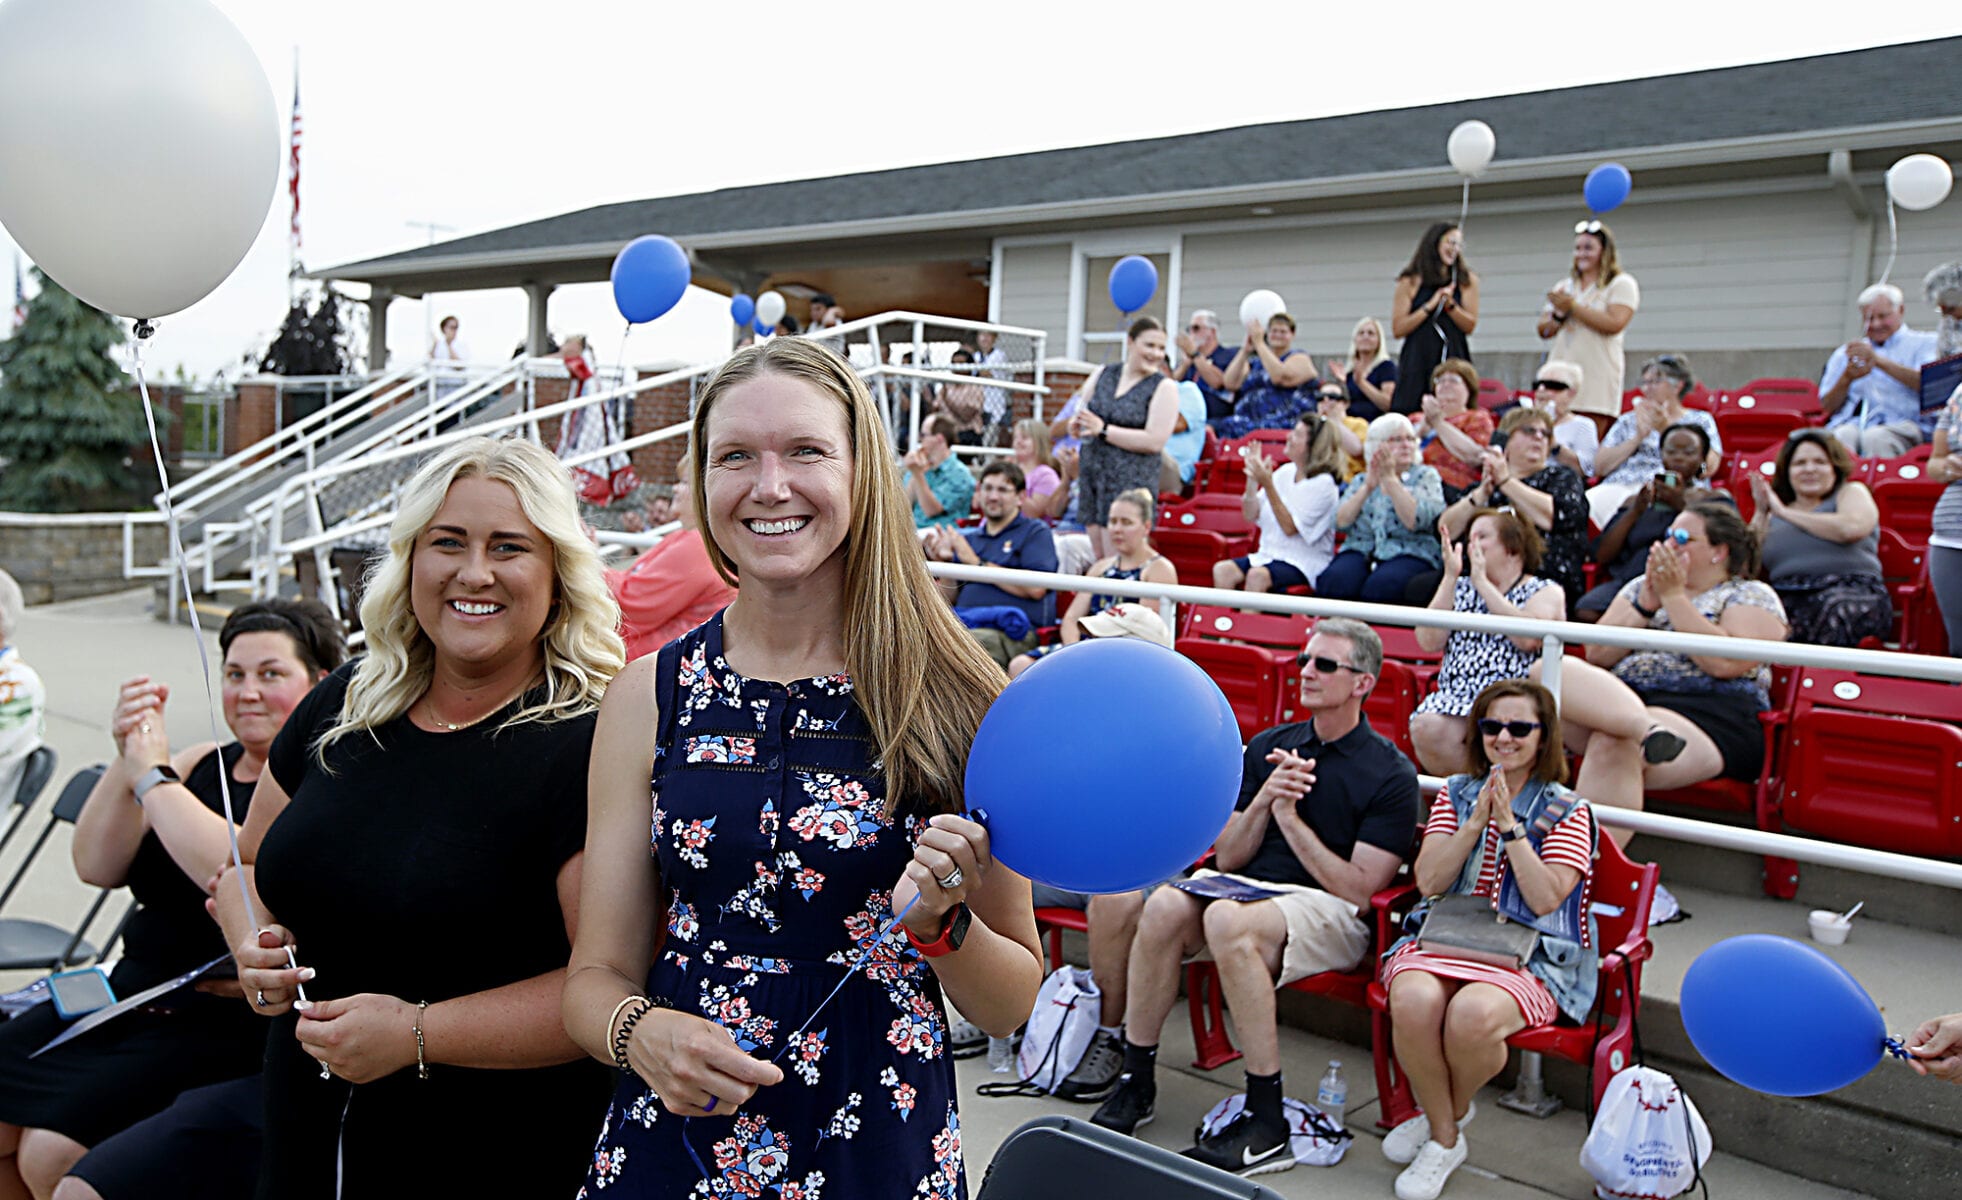 Two women, both holding balloons, smile at the camera. They stand in front of many seated guests at a ball park.